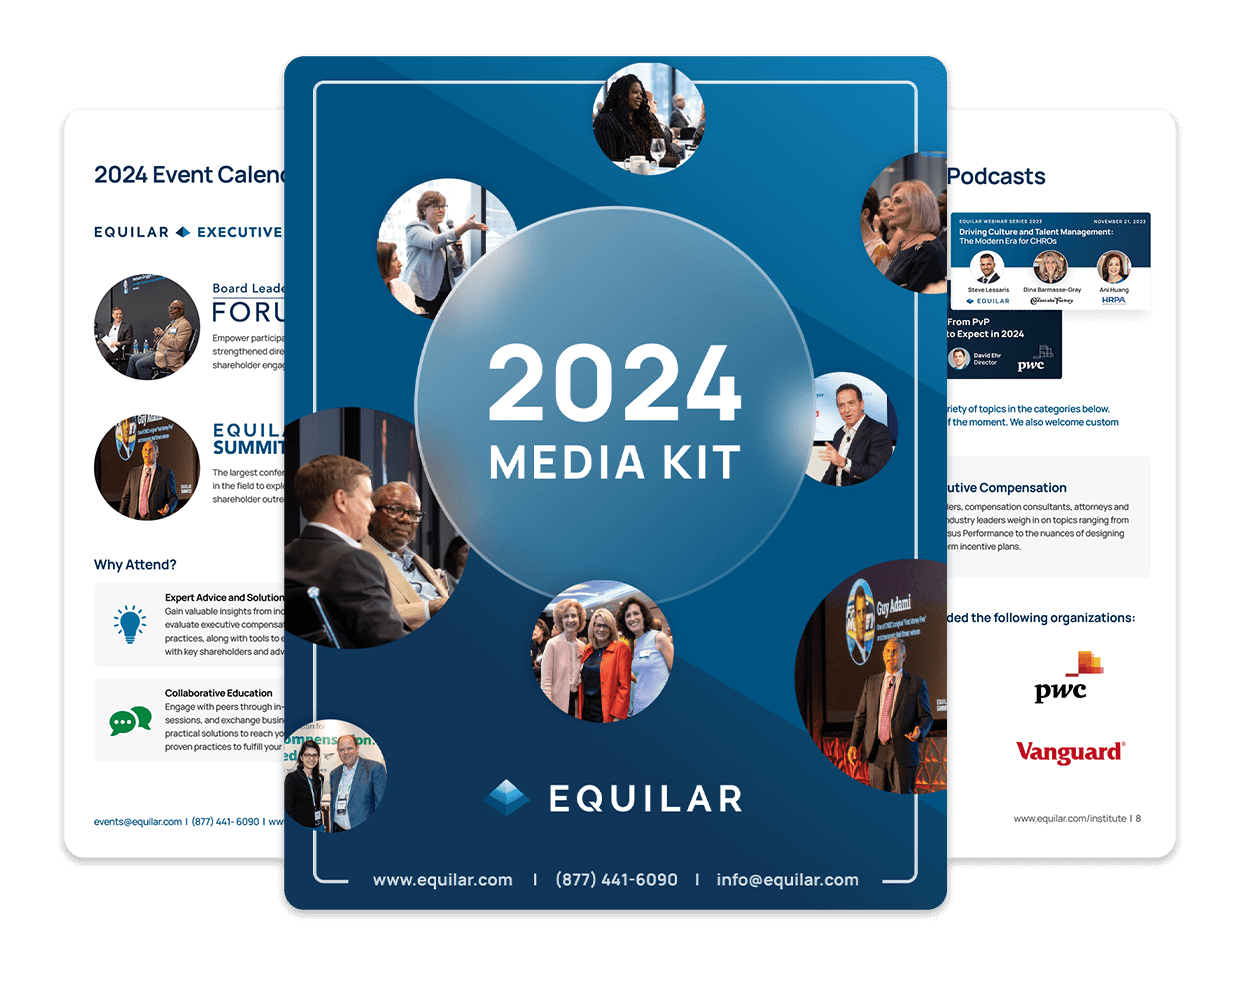 Discover the various integrated marketing communications tools we offer to reach the C-suite and boardroom with the Equilar 2023 Media Kit